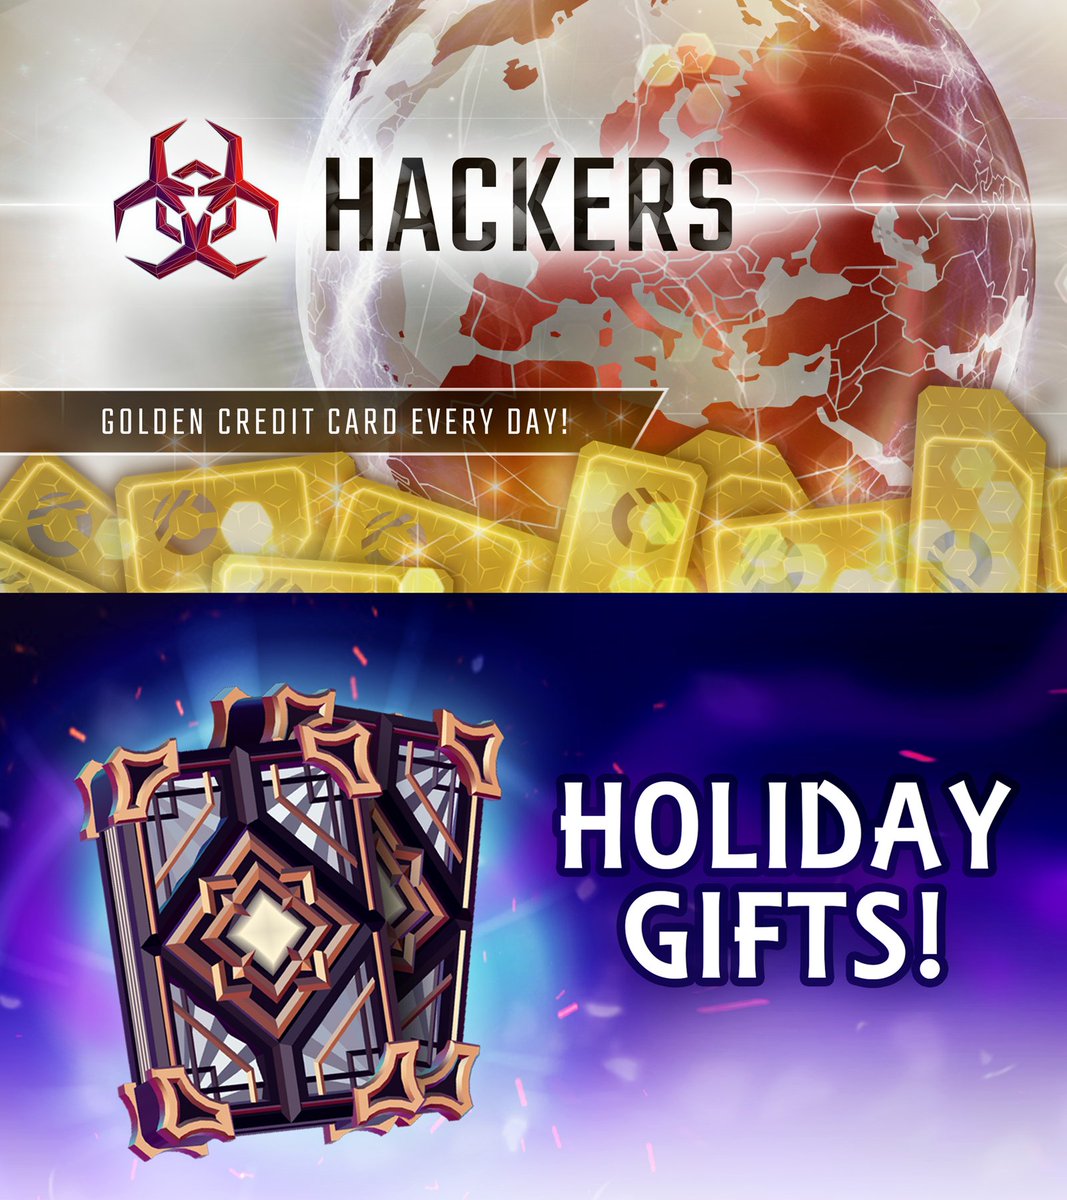 Holiday season is here and you know what it means.. gifts! Golden credit cards every day till the end of the year for #Hackers players. Free card packs for #Monolisk players. Enjoy!